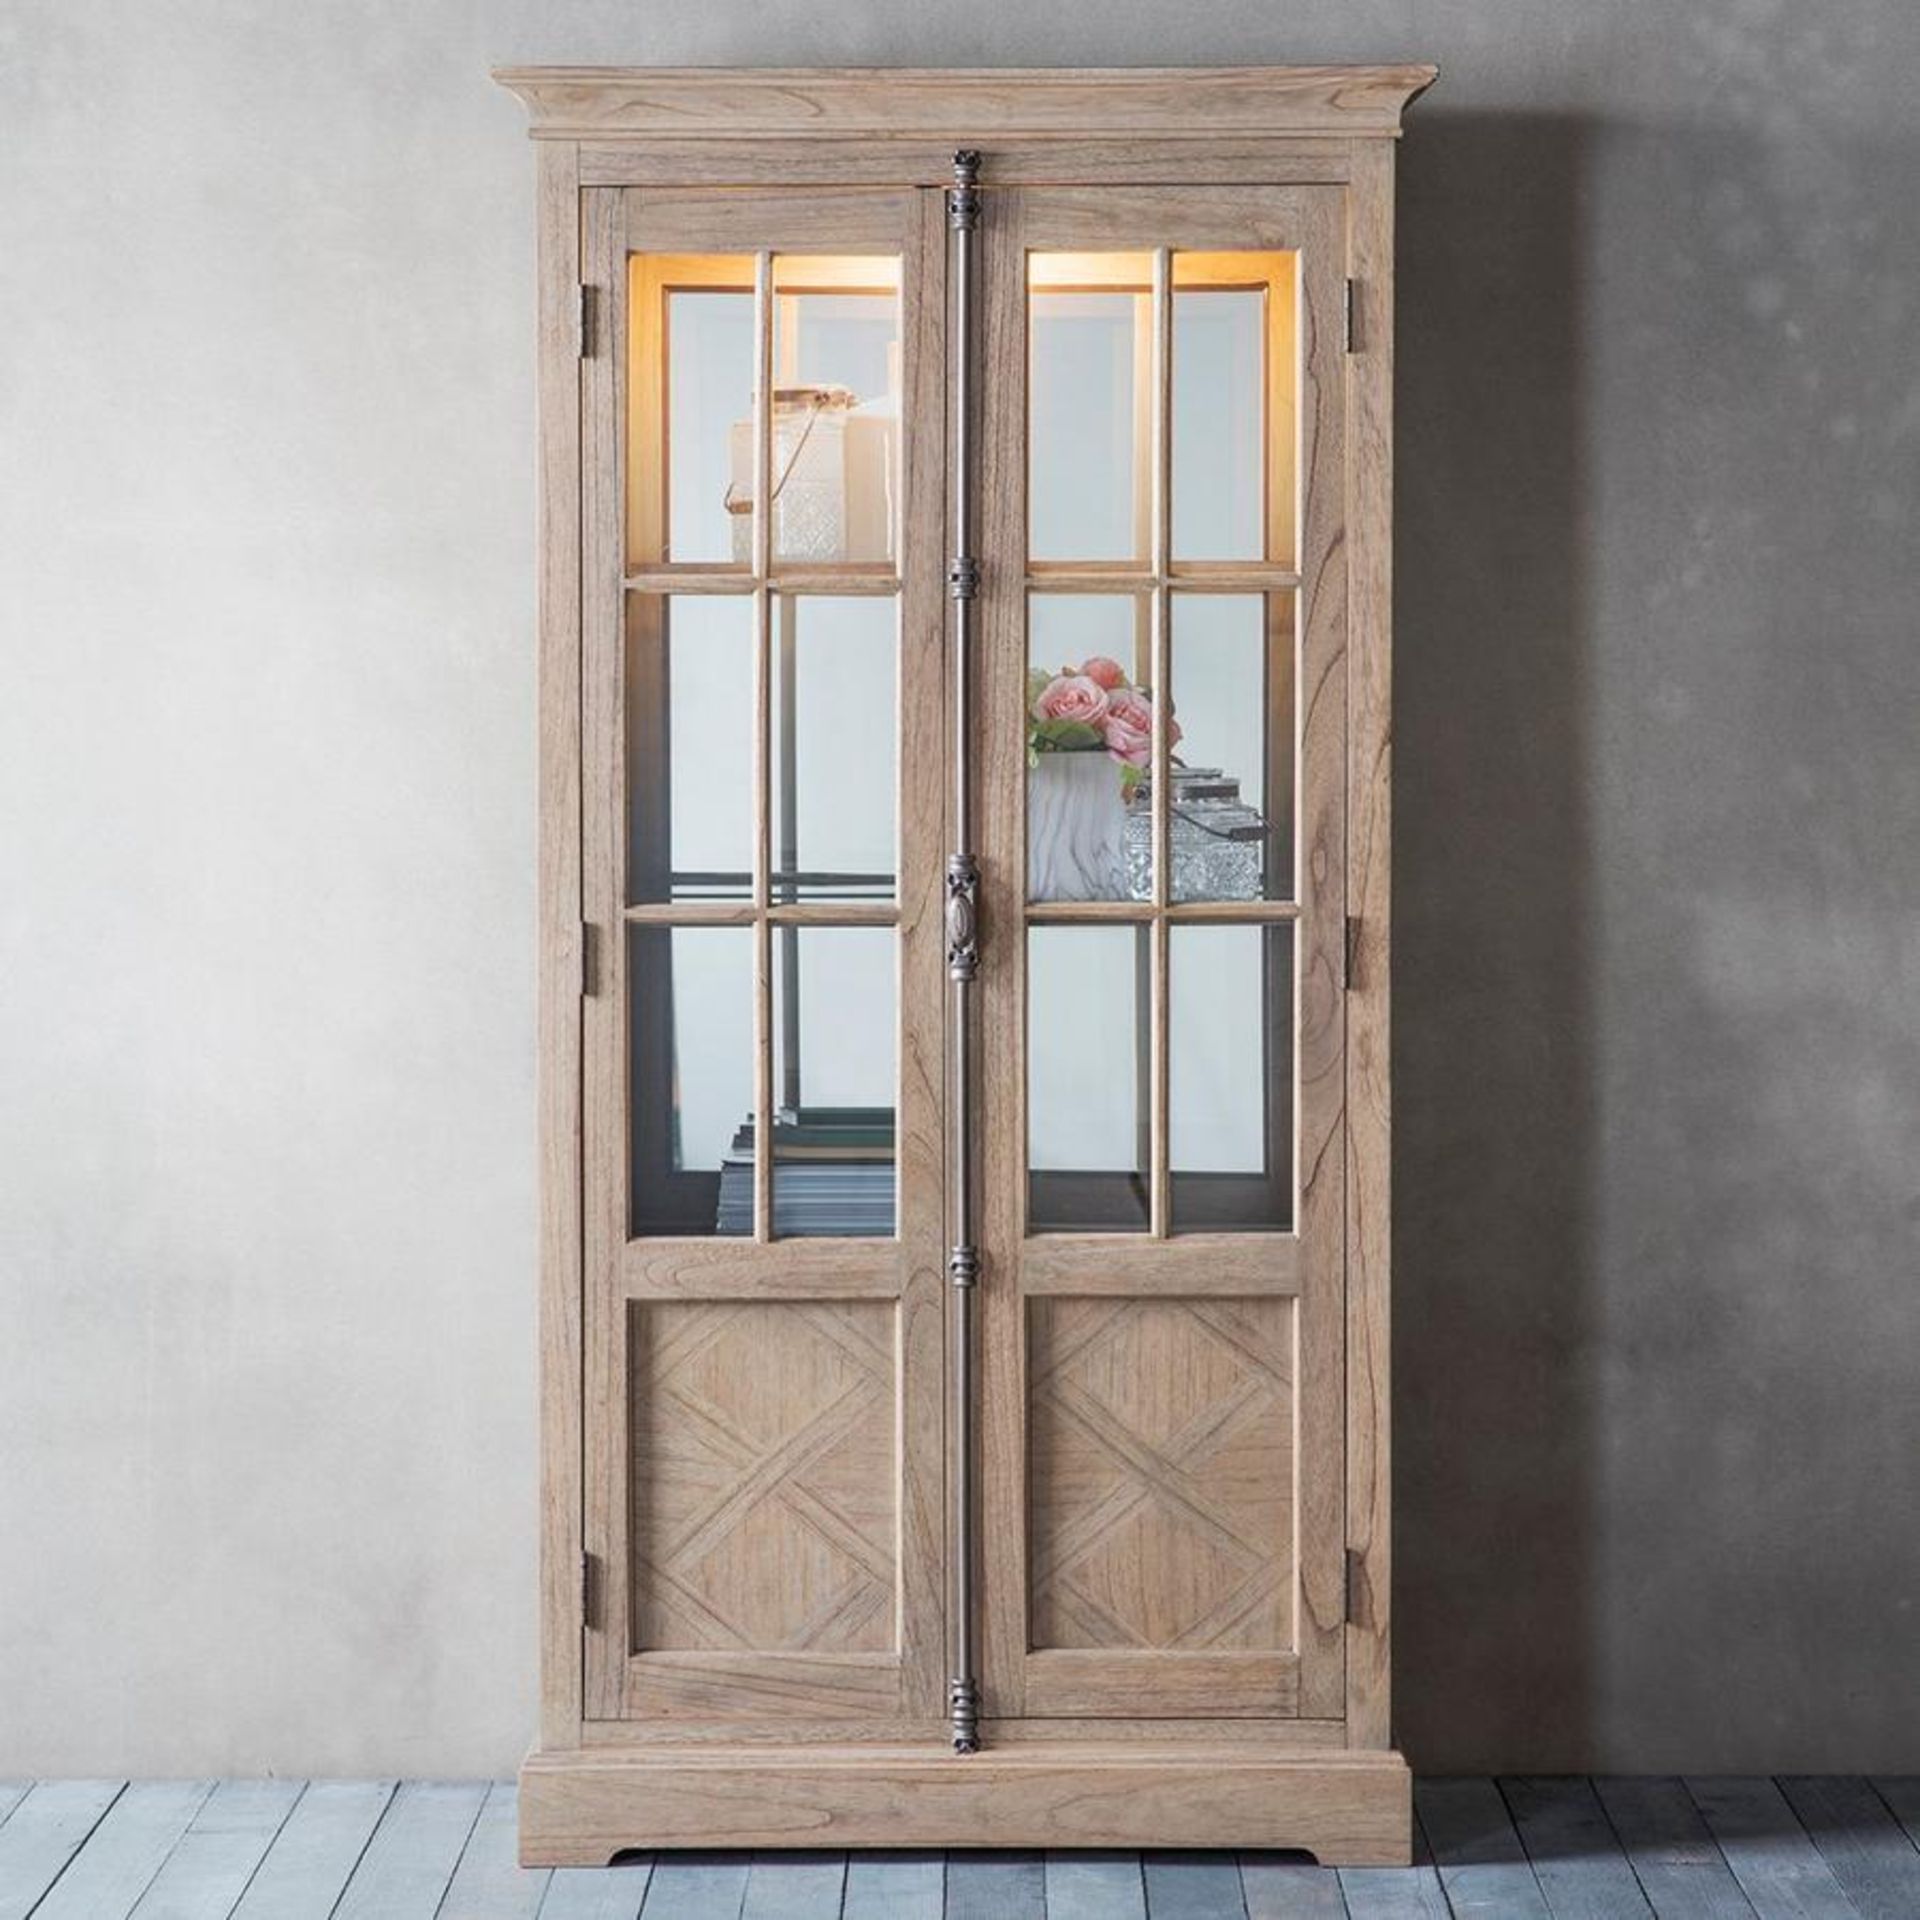 Mustique Display Cabinet With A Touch Of Inspiration From The French Colonial Style, This Gorgeous 2